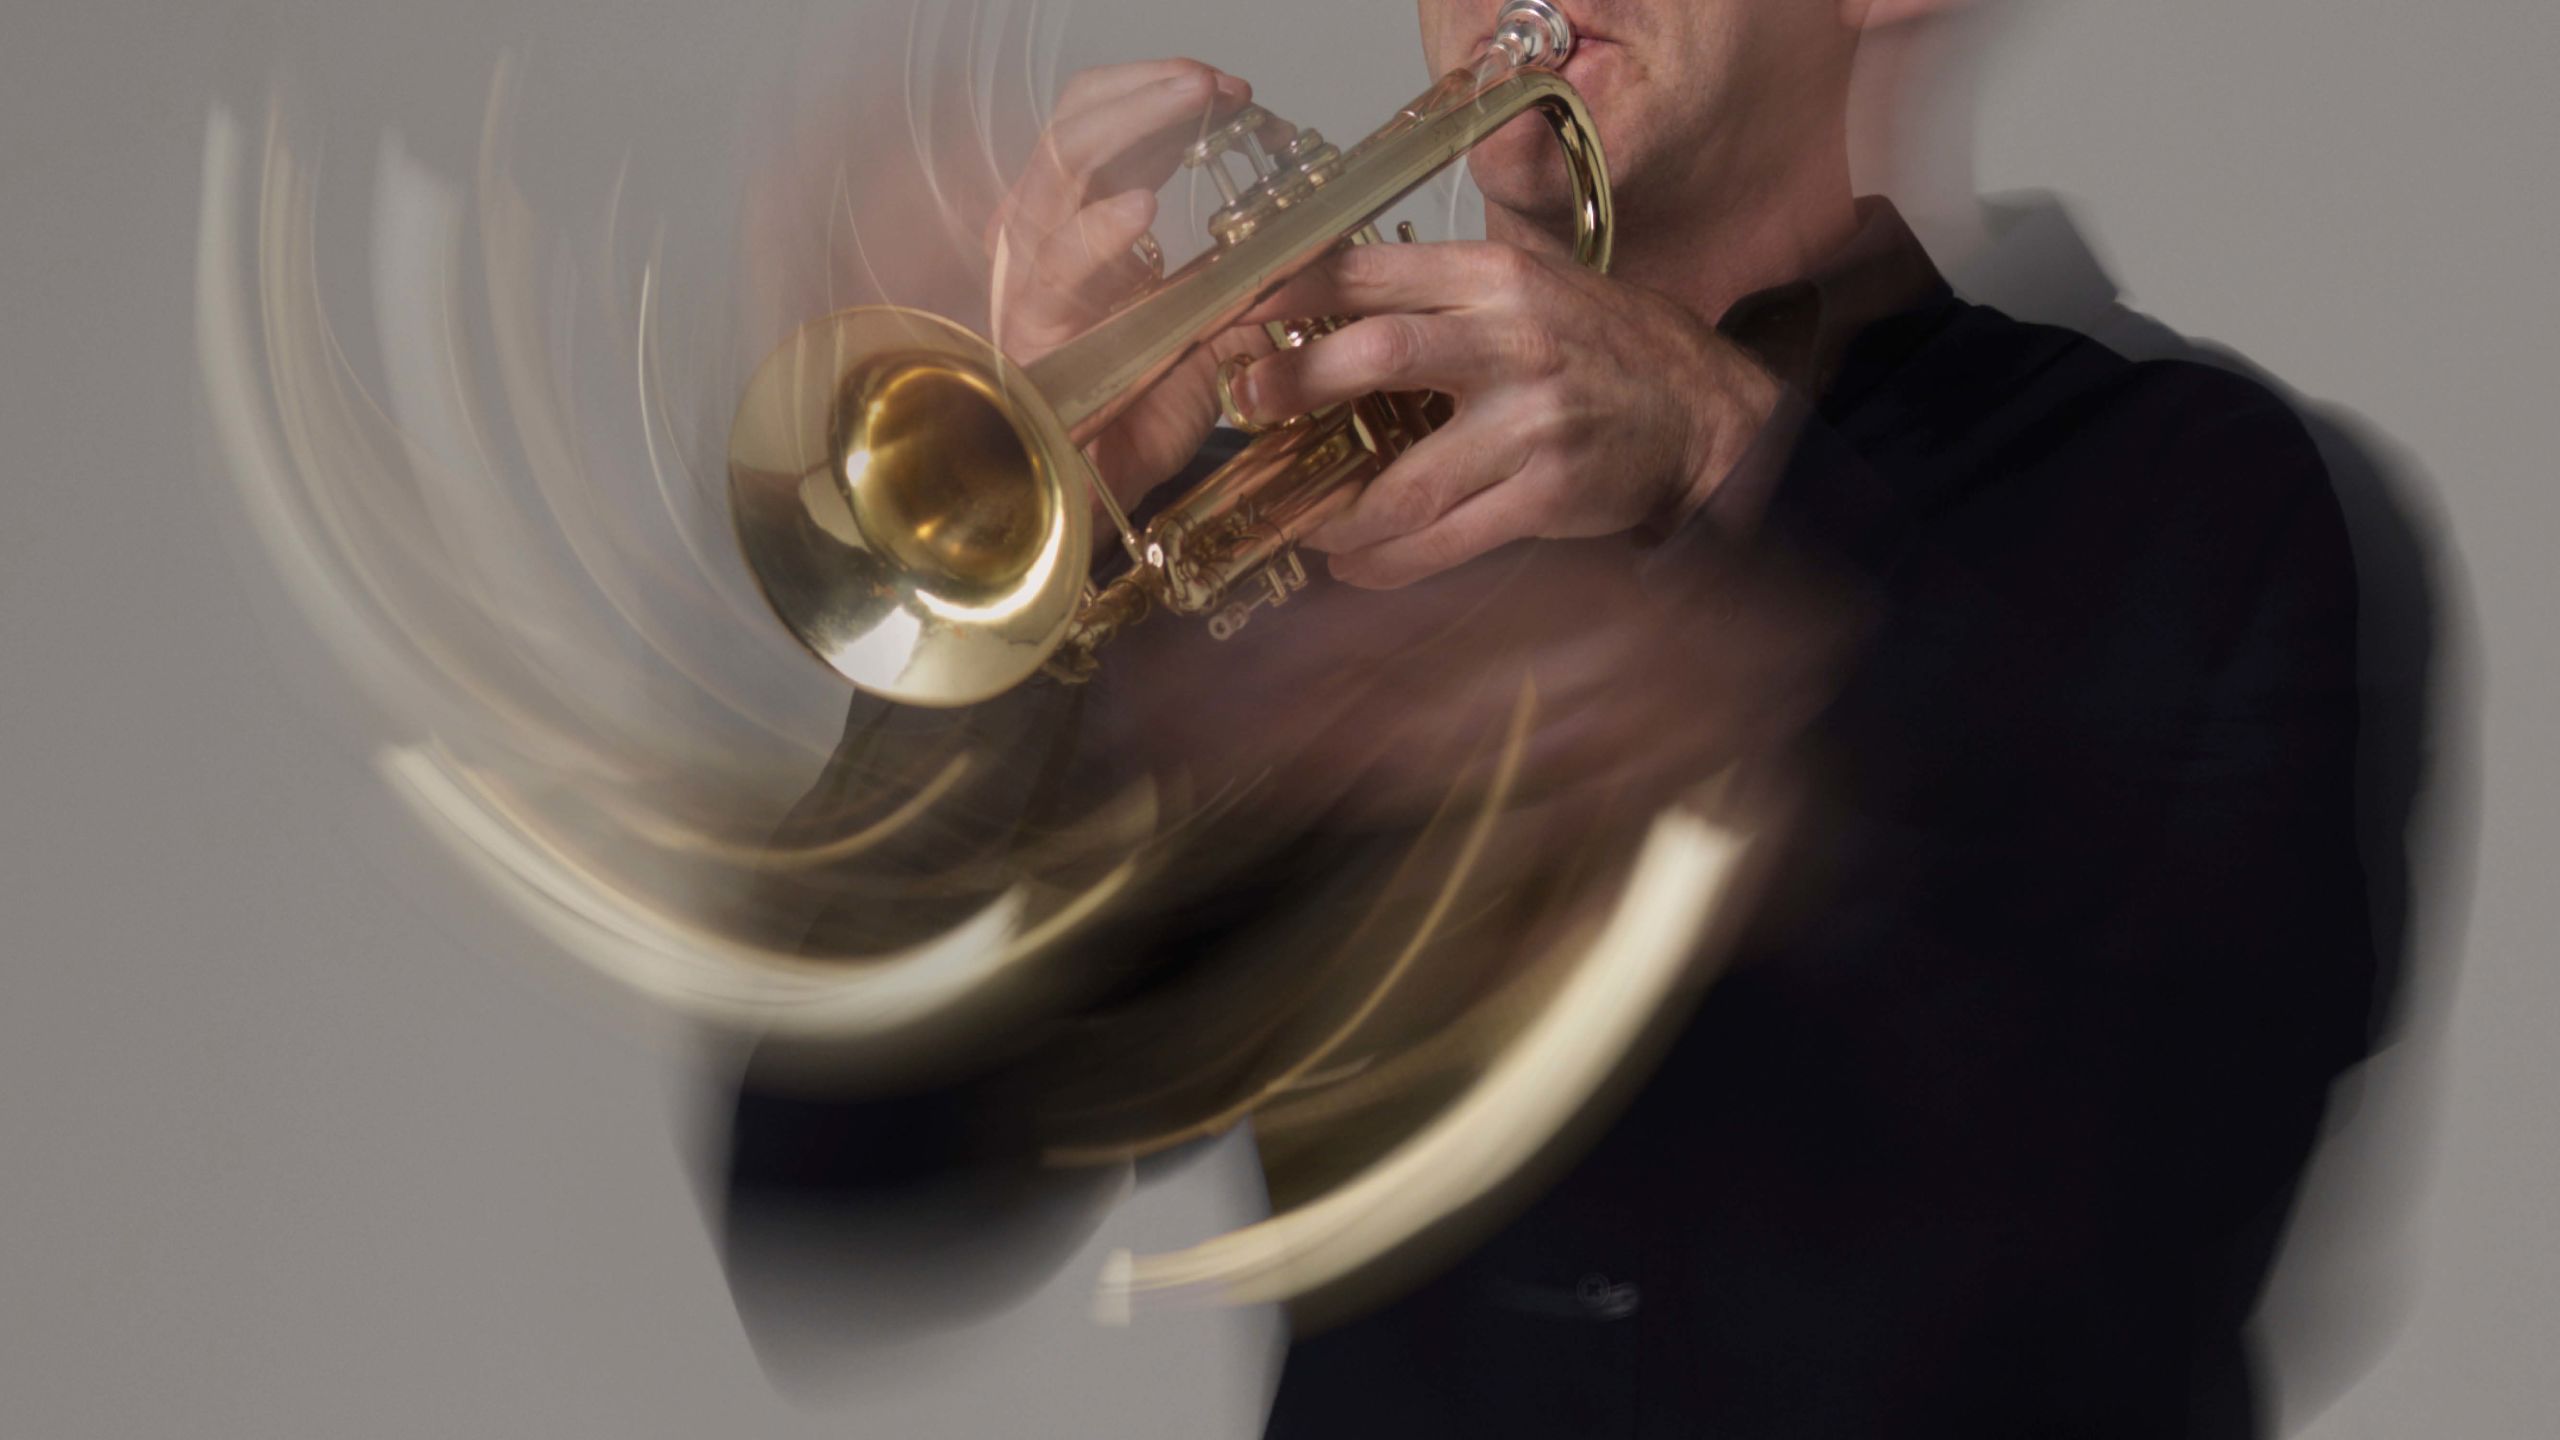 Close up photograph of a musician playing a trumpet.